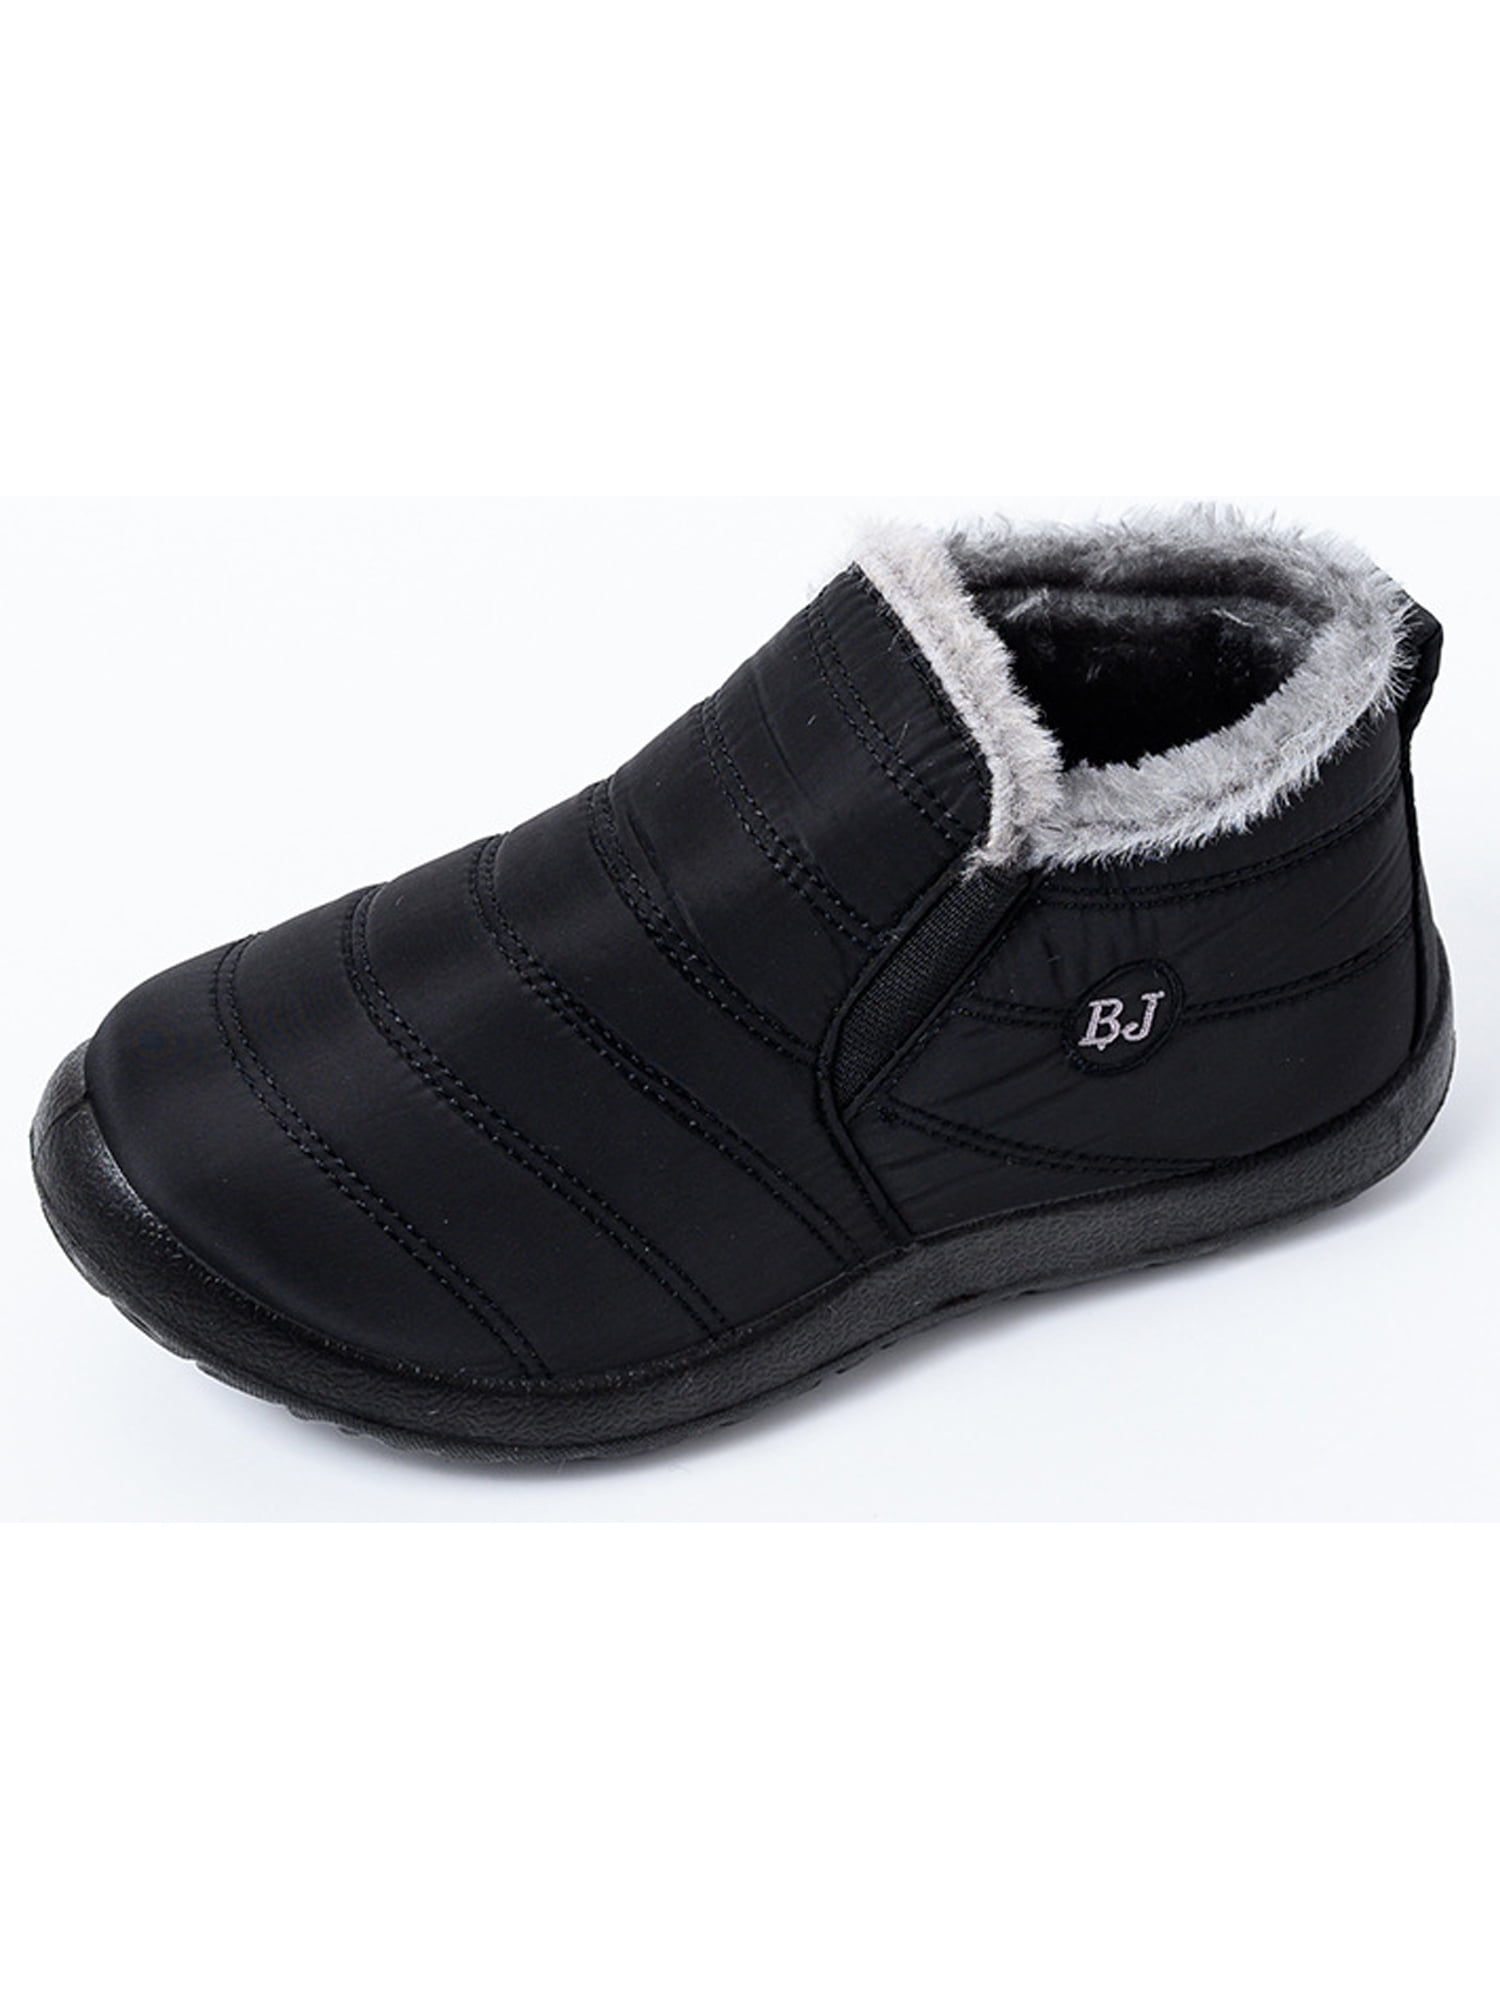 winter Mens Waterproof fur lined slip on casual snow boots cotton shoes 